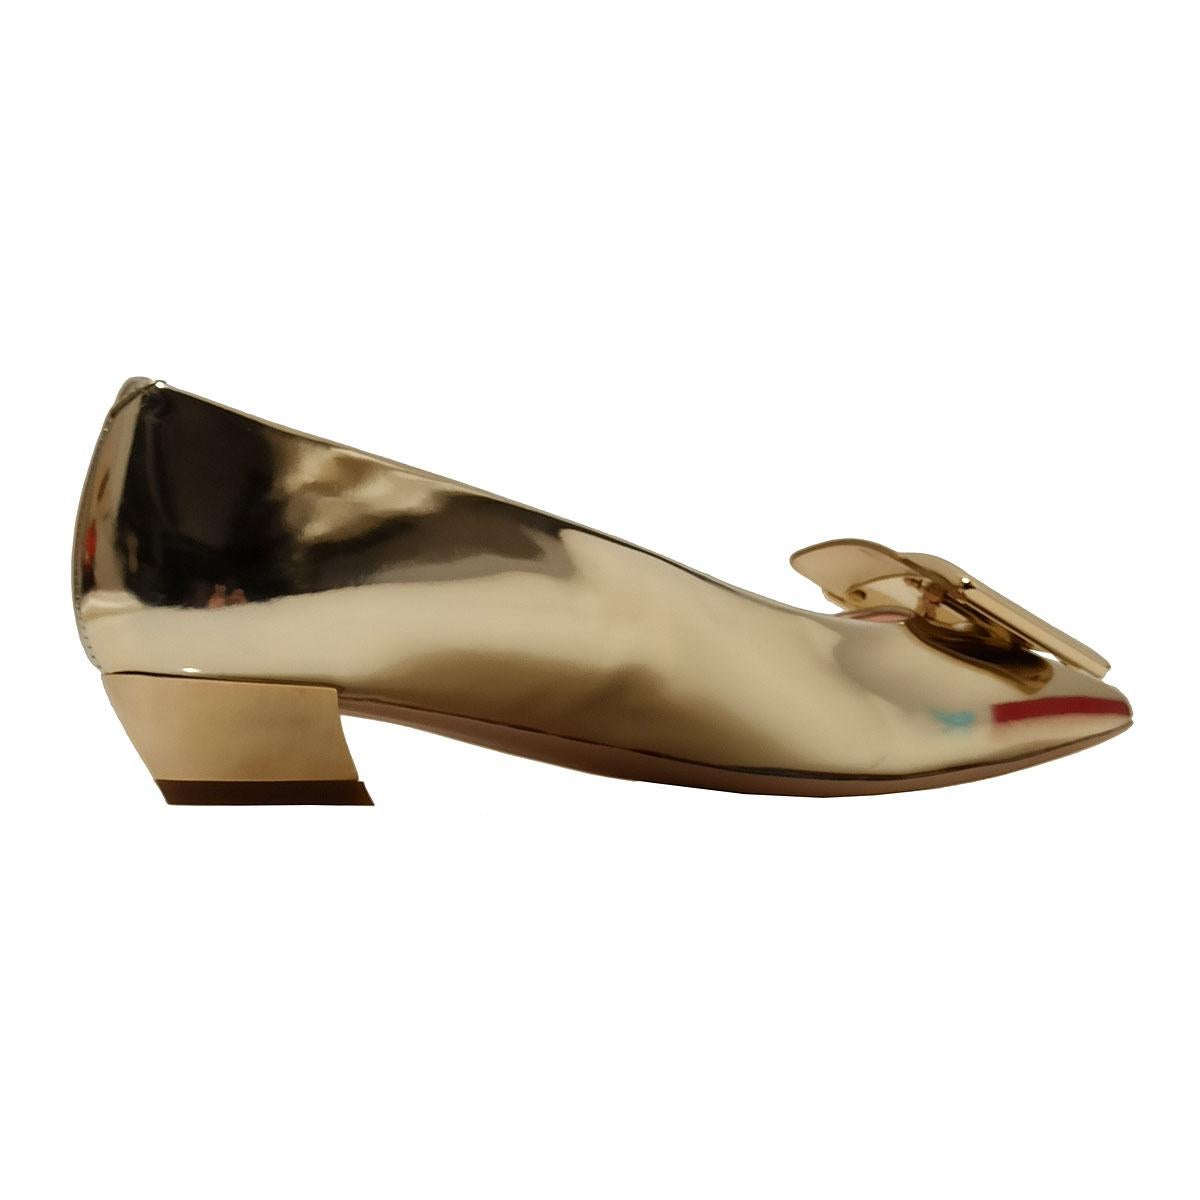 Beautiful Roger Vivier ballerina flat
Leather
Clear gold color
Metal buckle
Heel height cm 2,5 (0.98 inches)
Original price € 650
With box
Worldwide express shipping included in the price !